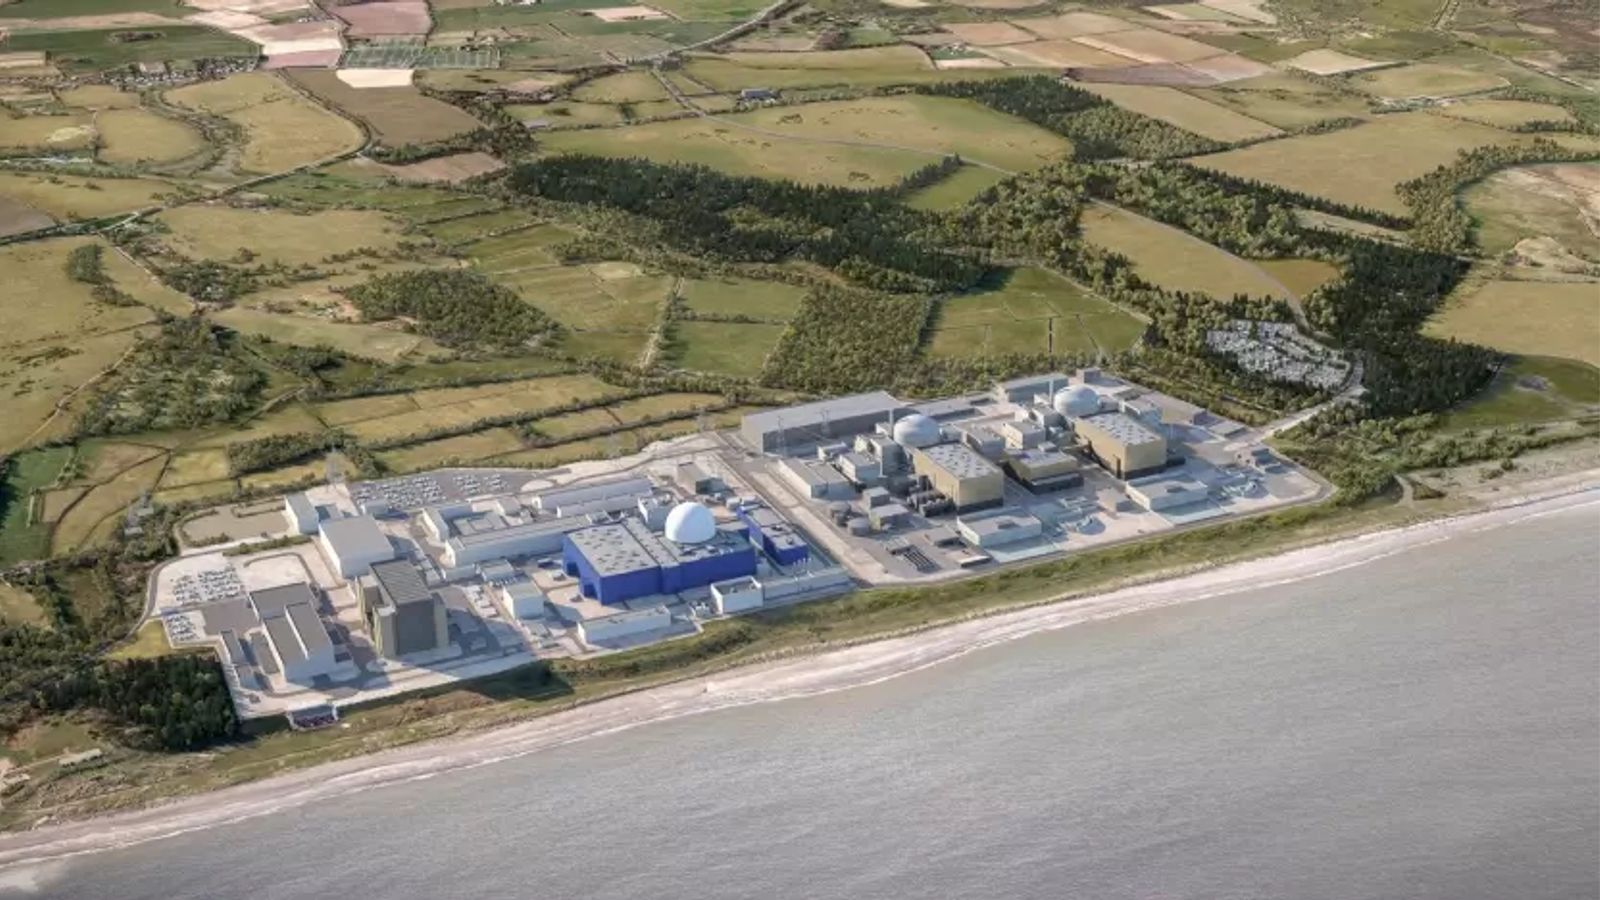 China bought out of Sizewell C as UK confirms £700m stake in nuclear project 